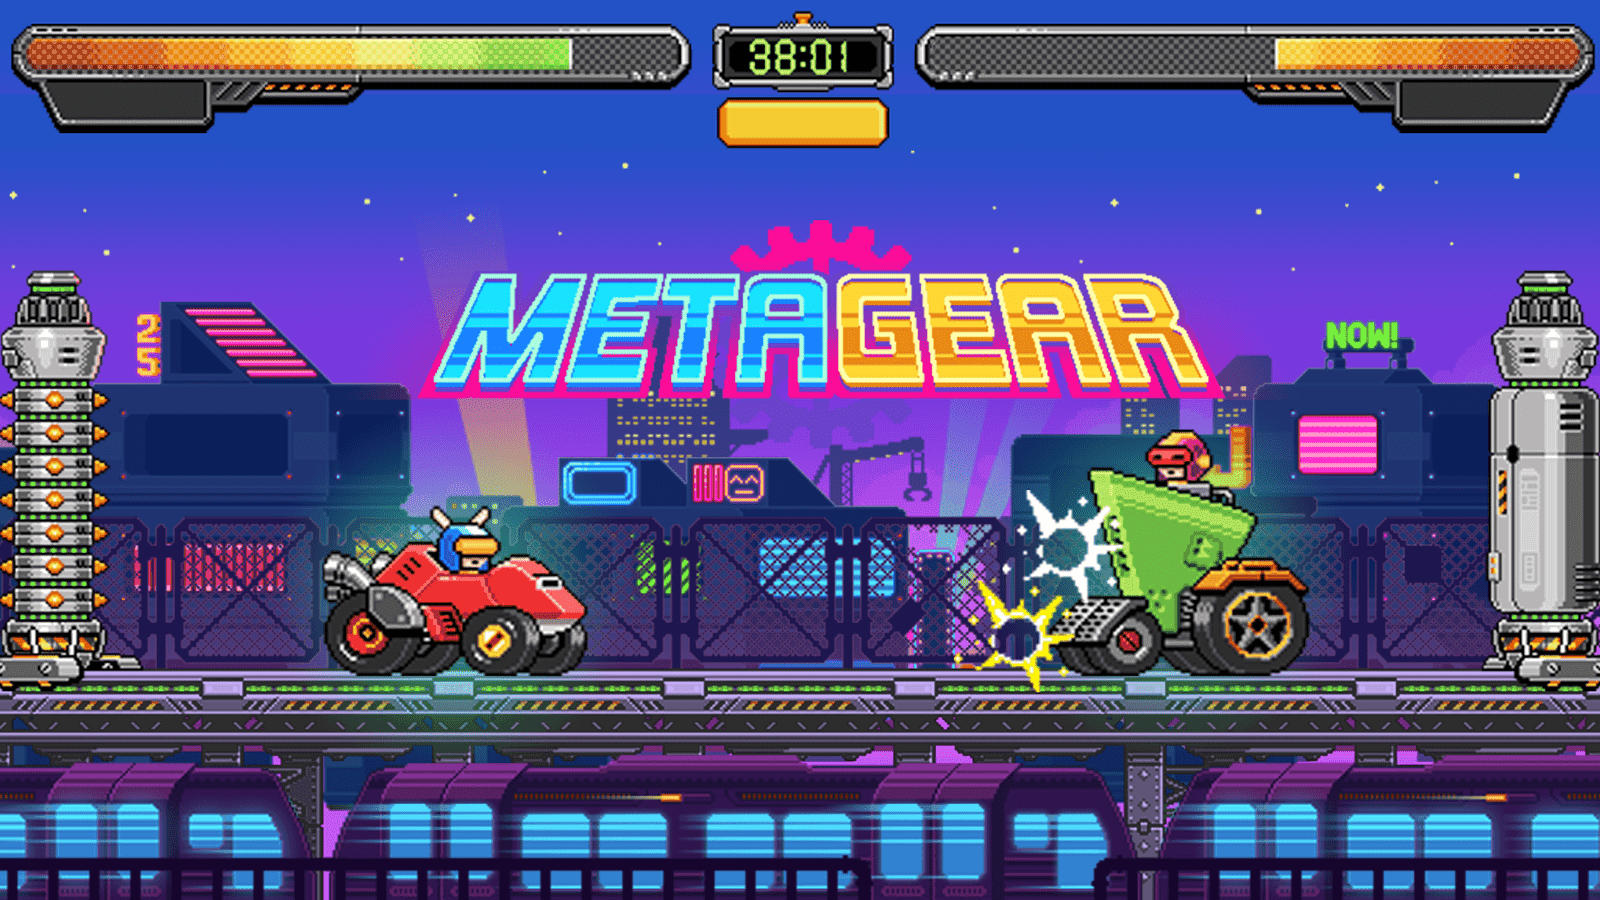 Metagear - Game Review - Play Games